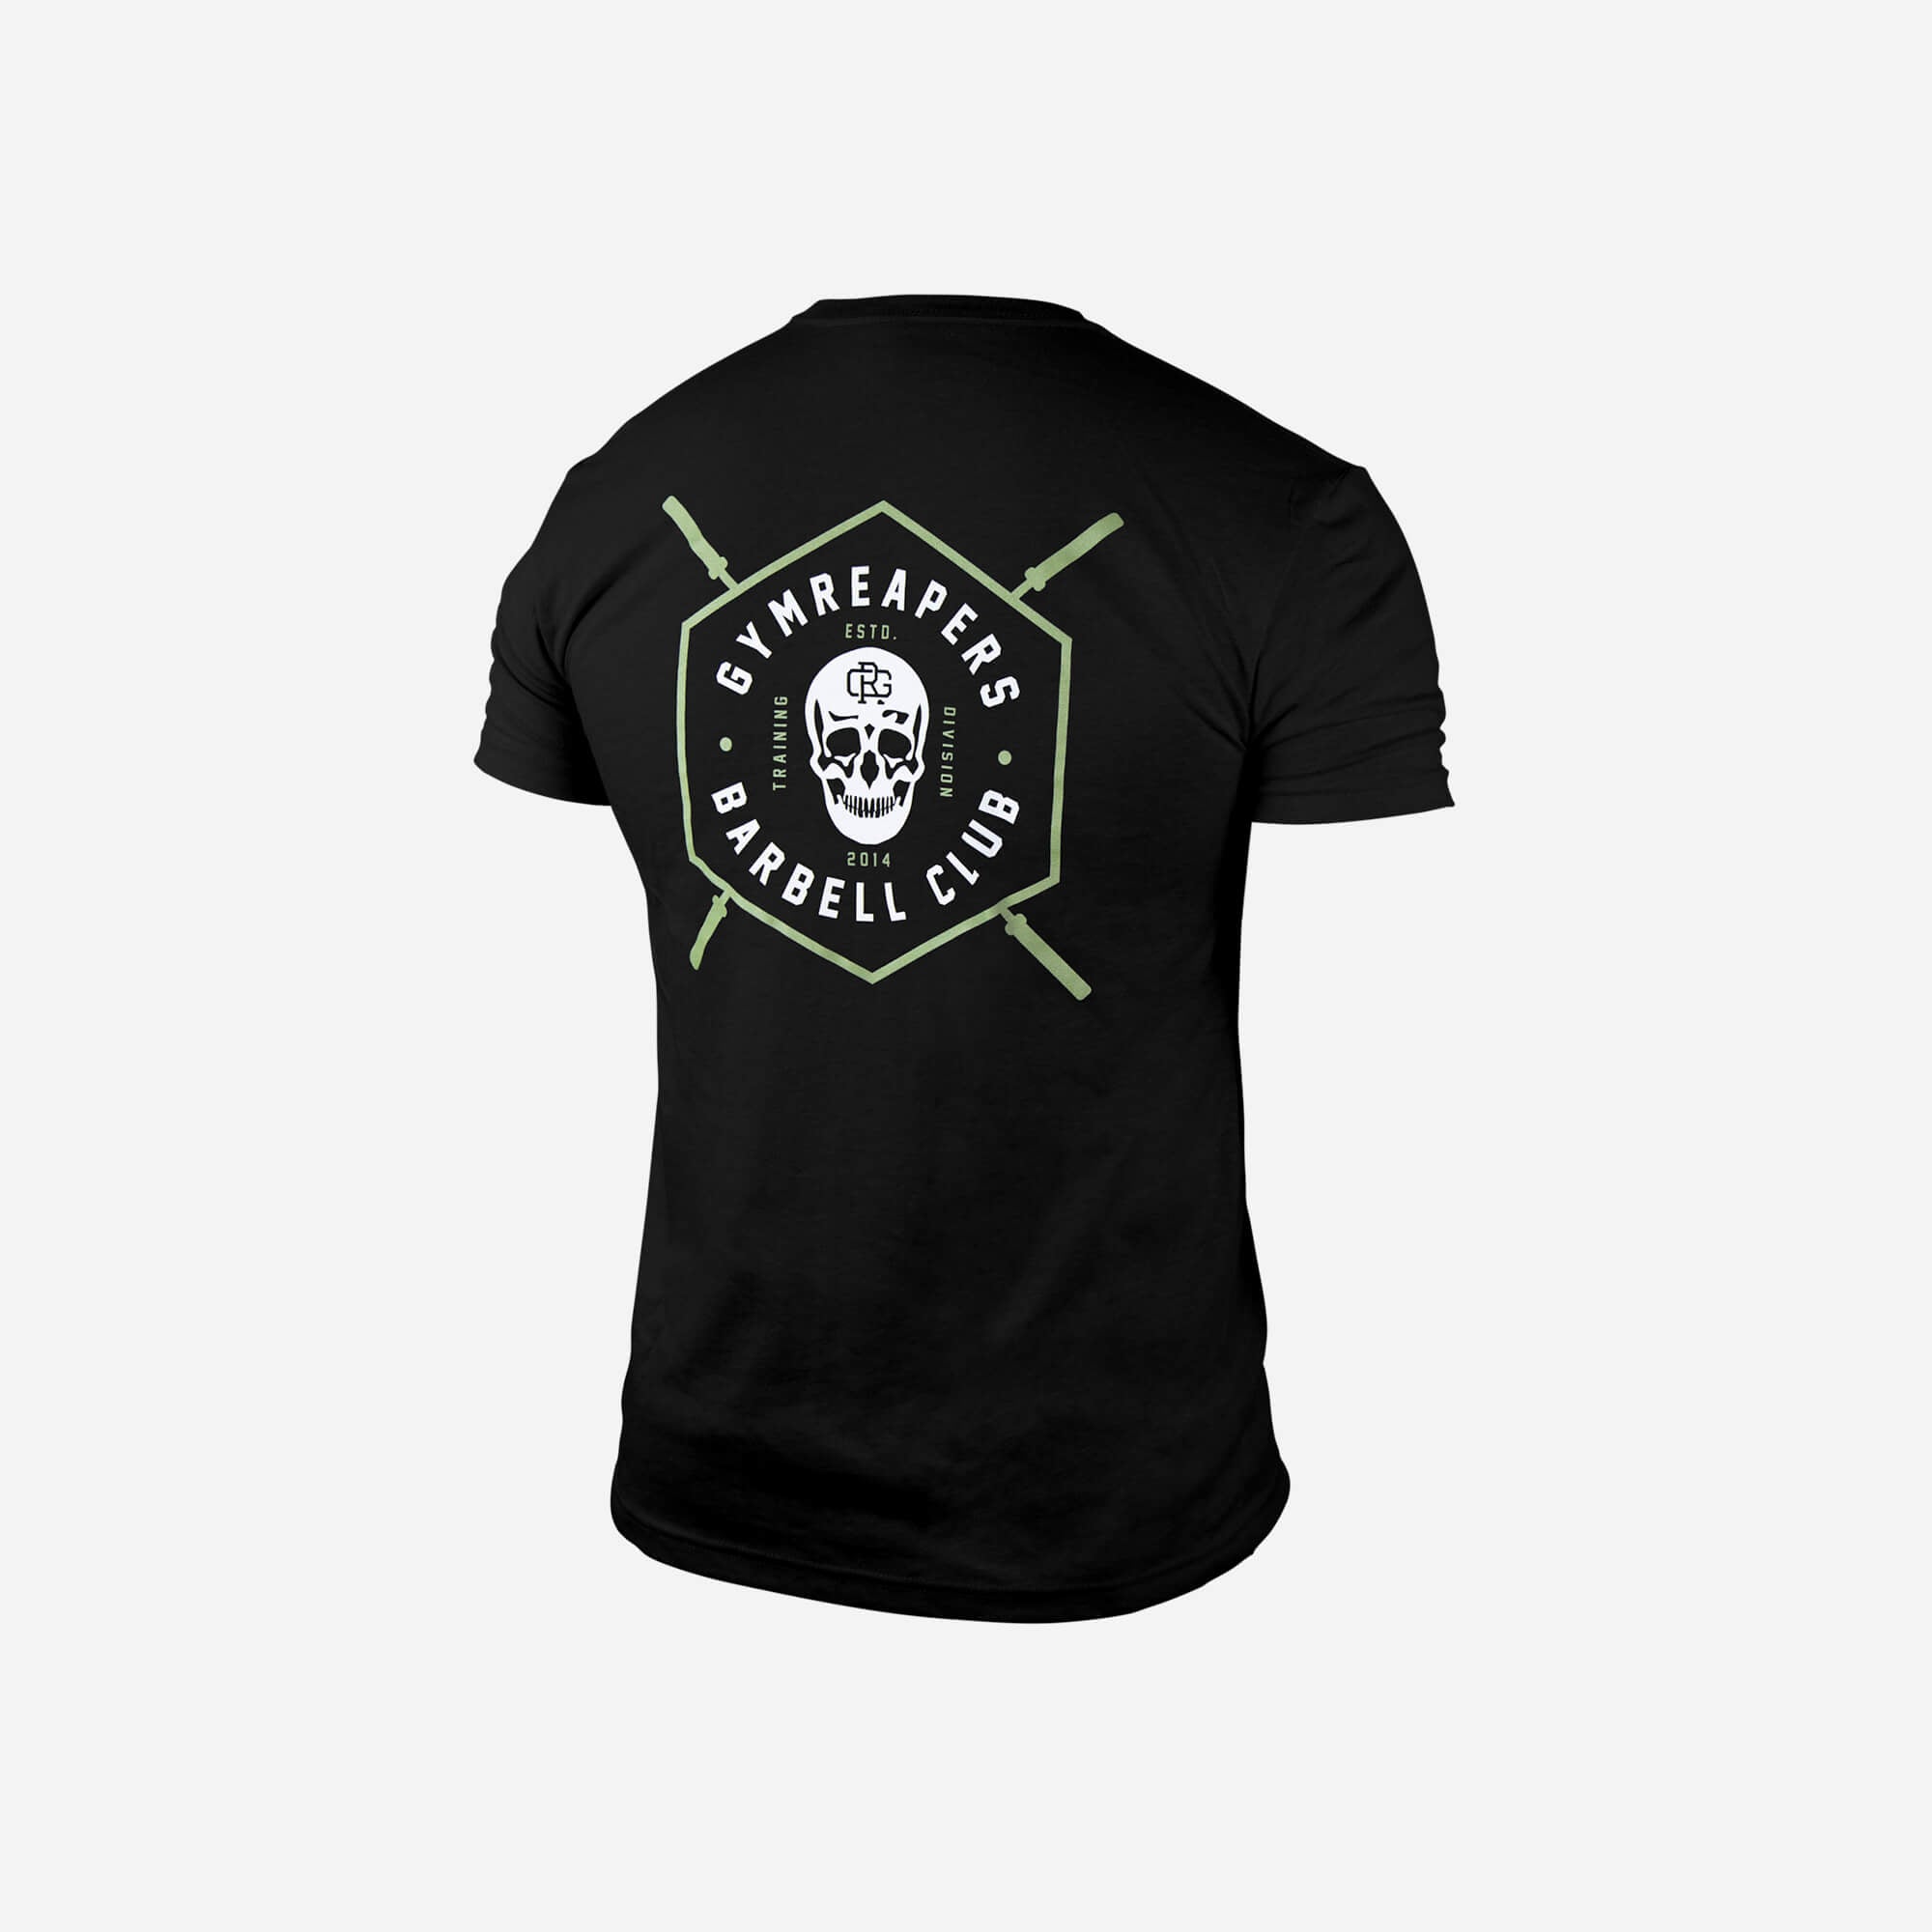 Gymreapers GR Tee - Black/White